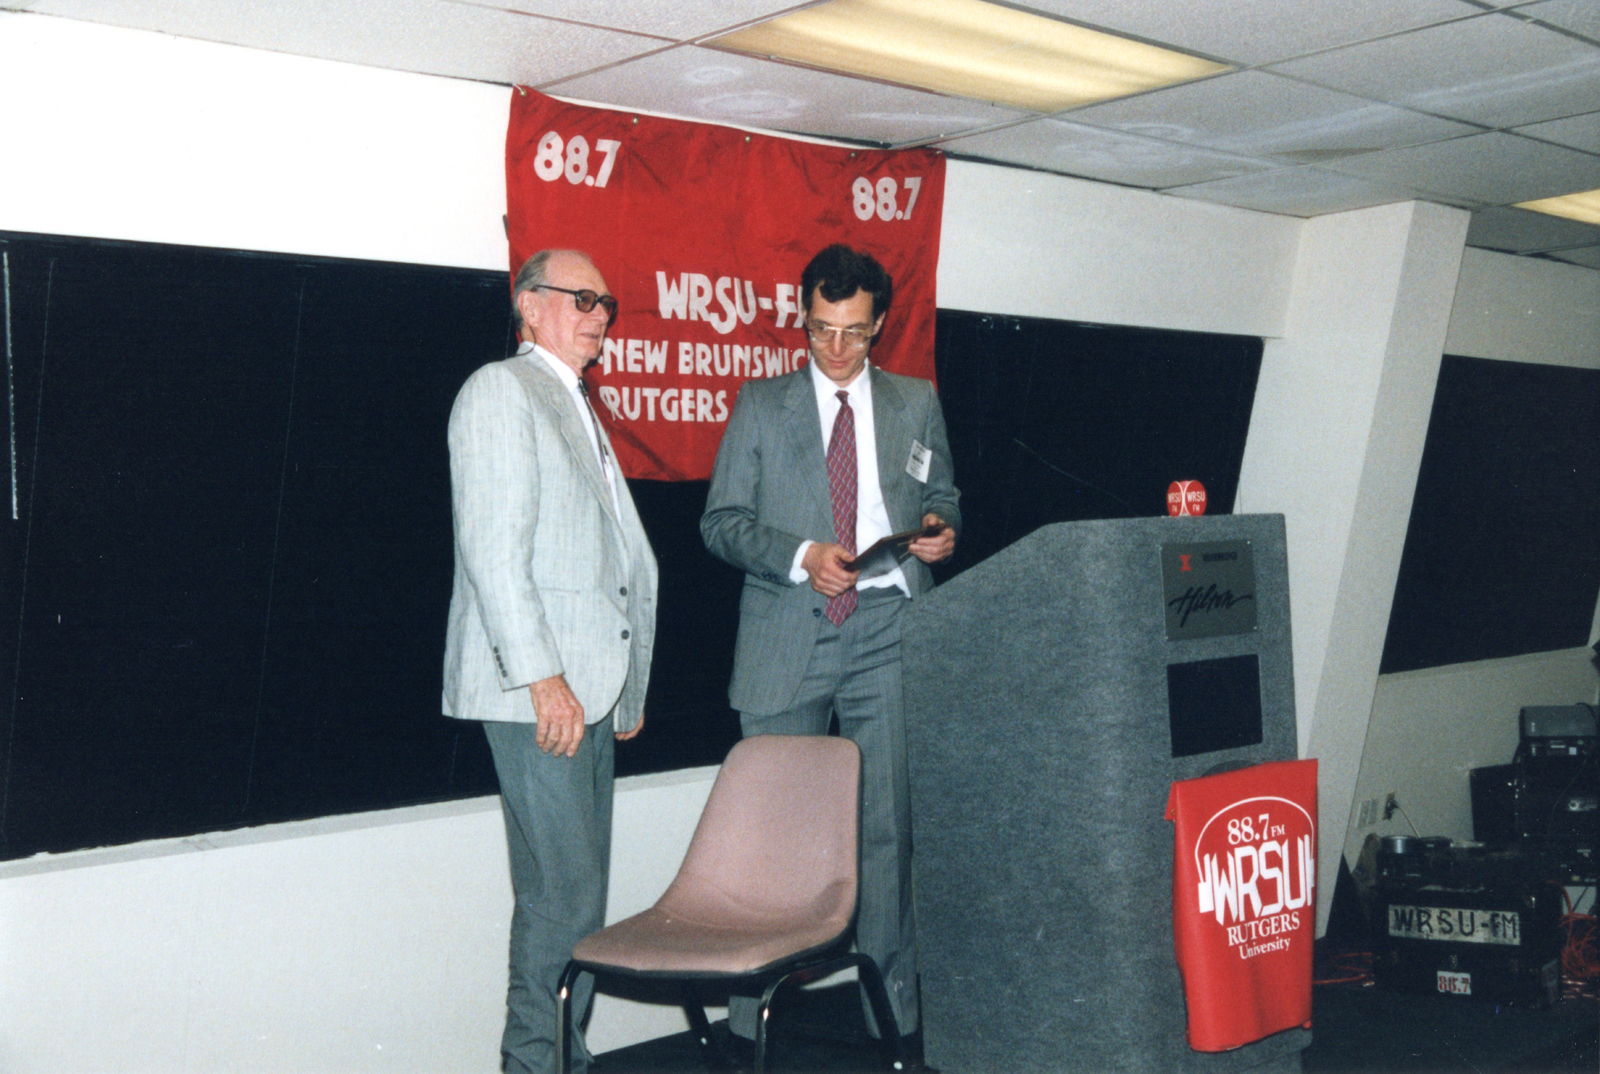 Daniel Schleck giving Charles Brookwell a plaque to commemorate WRSU s beginning.